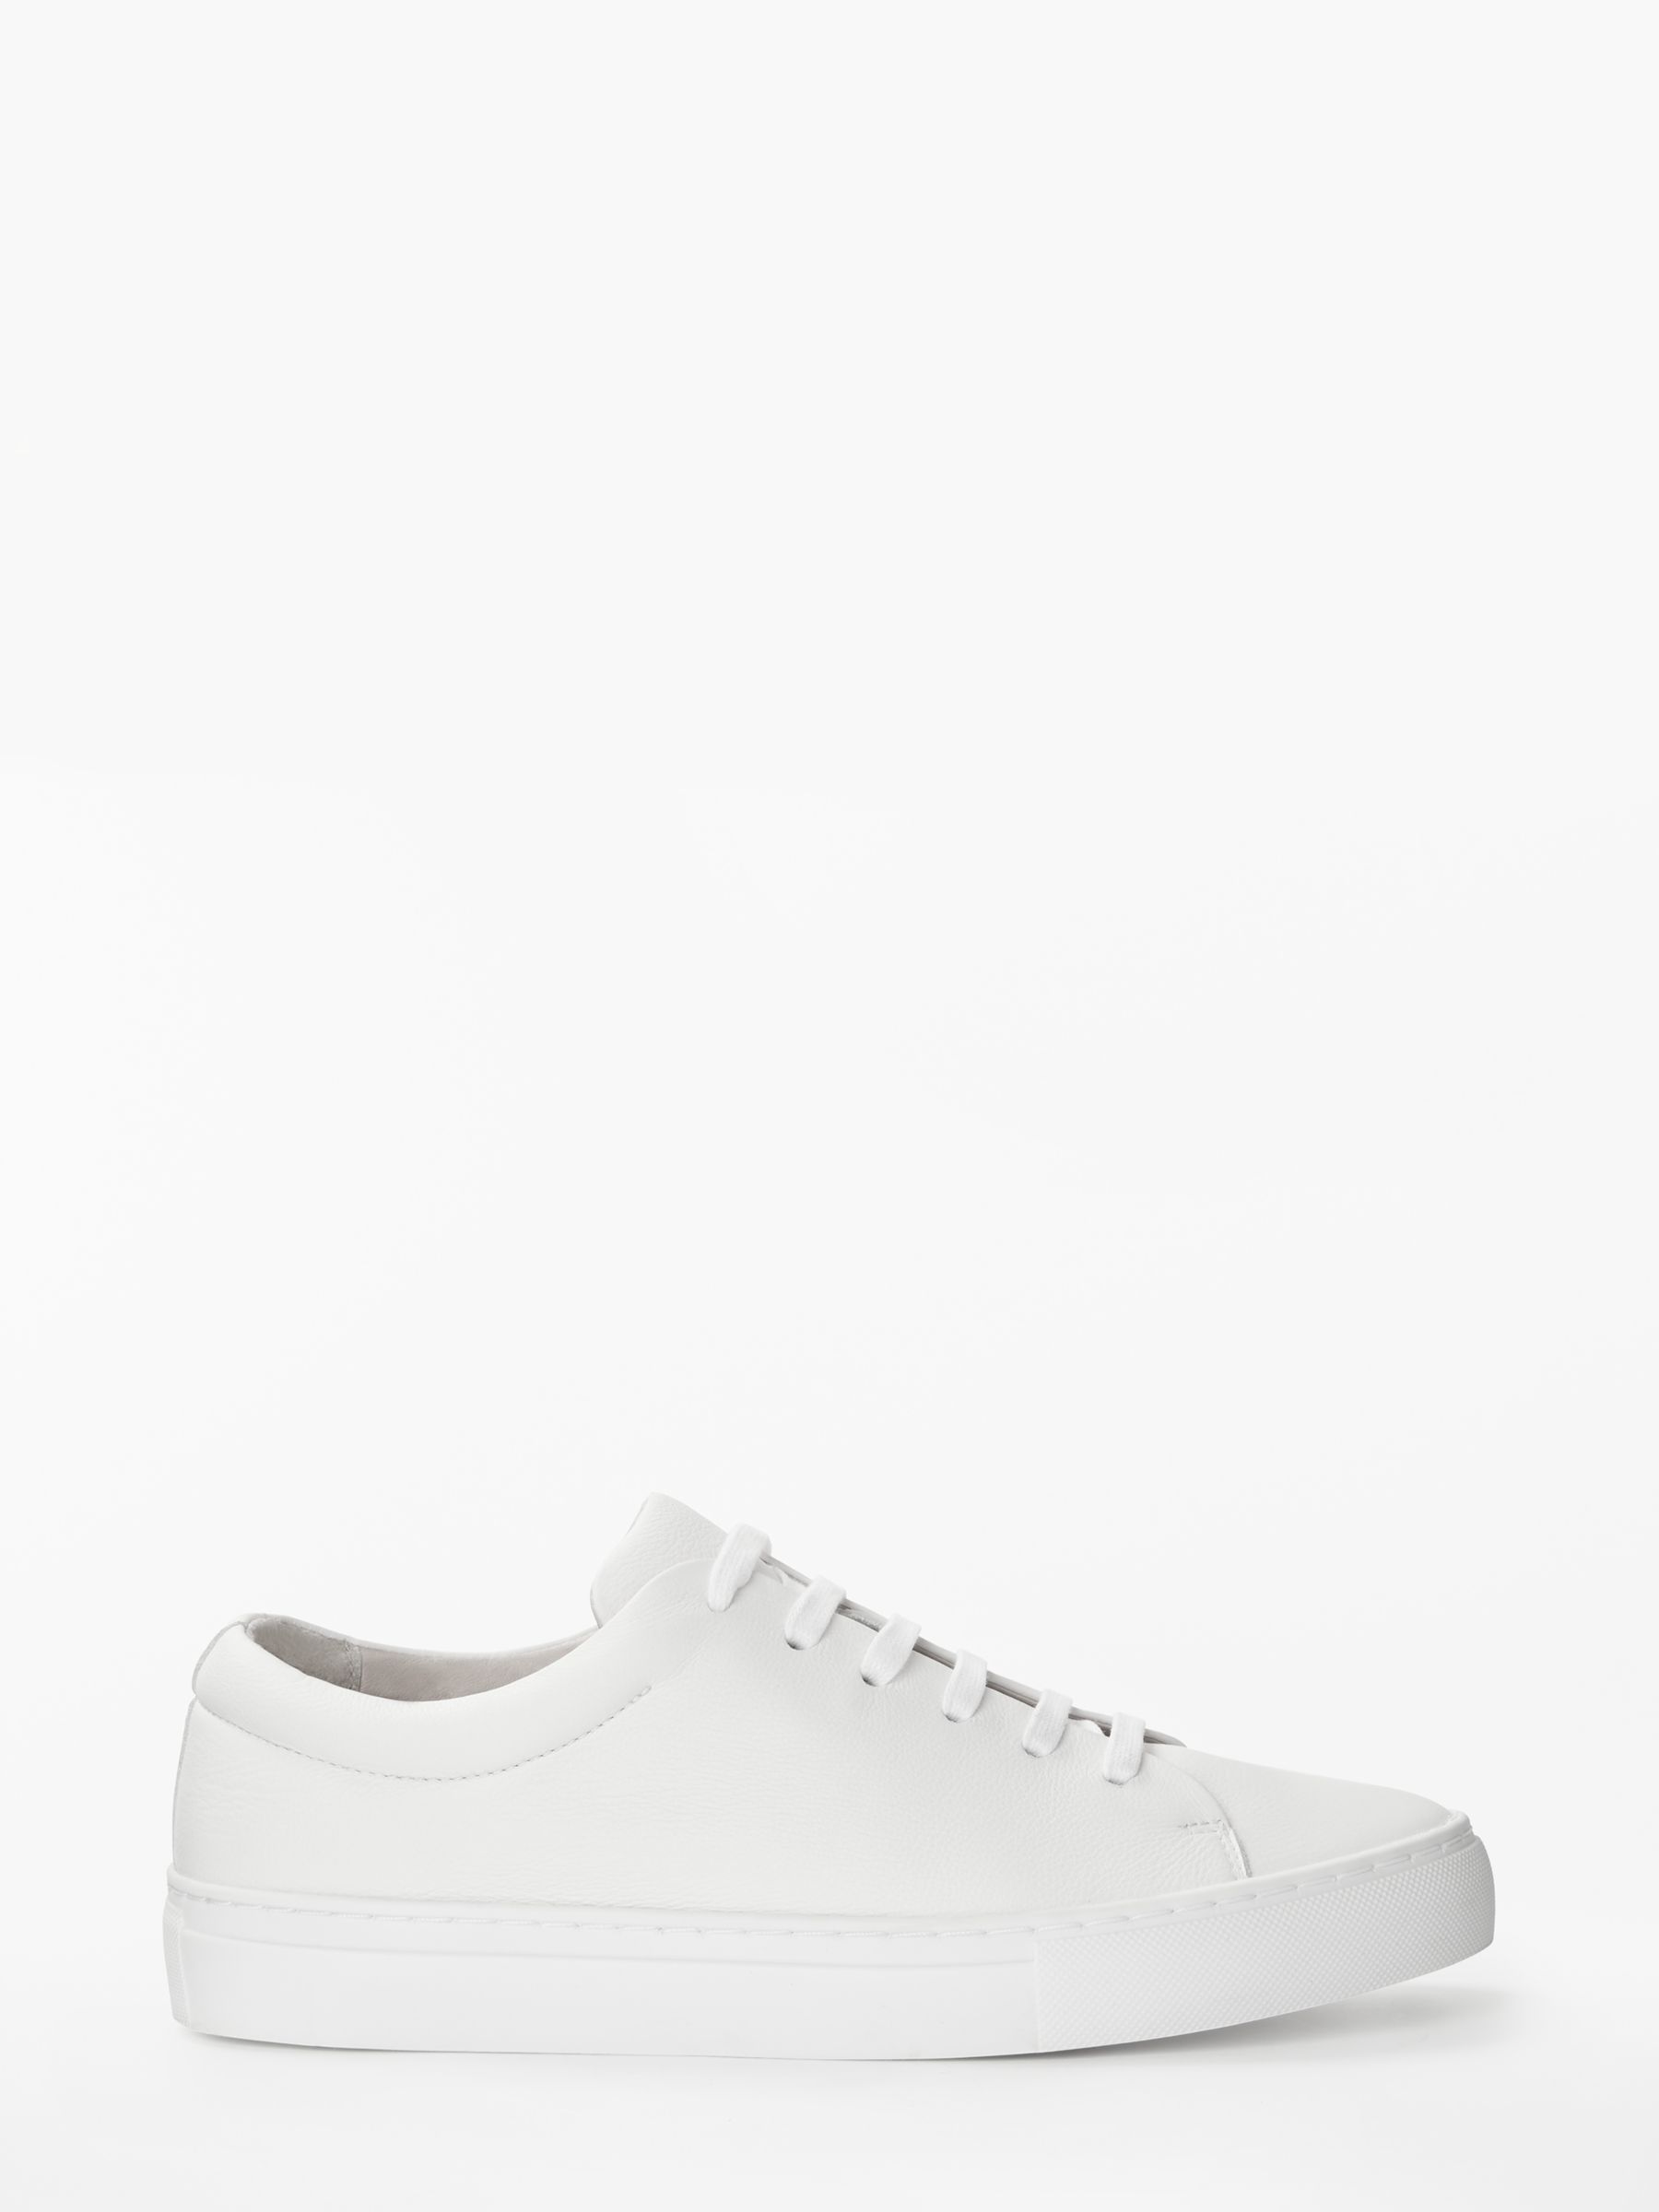 contar hasta traductor Recitar John Lewis Flora Lace Up Trainers, White Leather at John Lewis & Partners